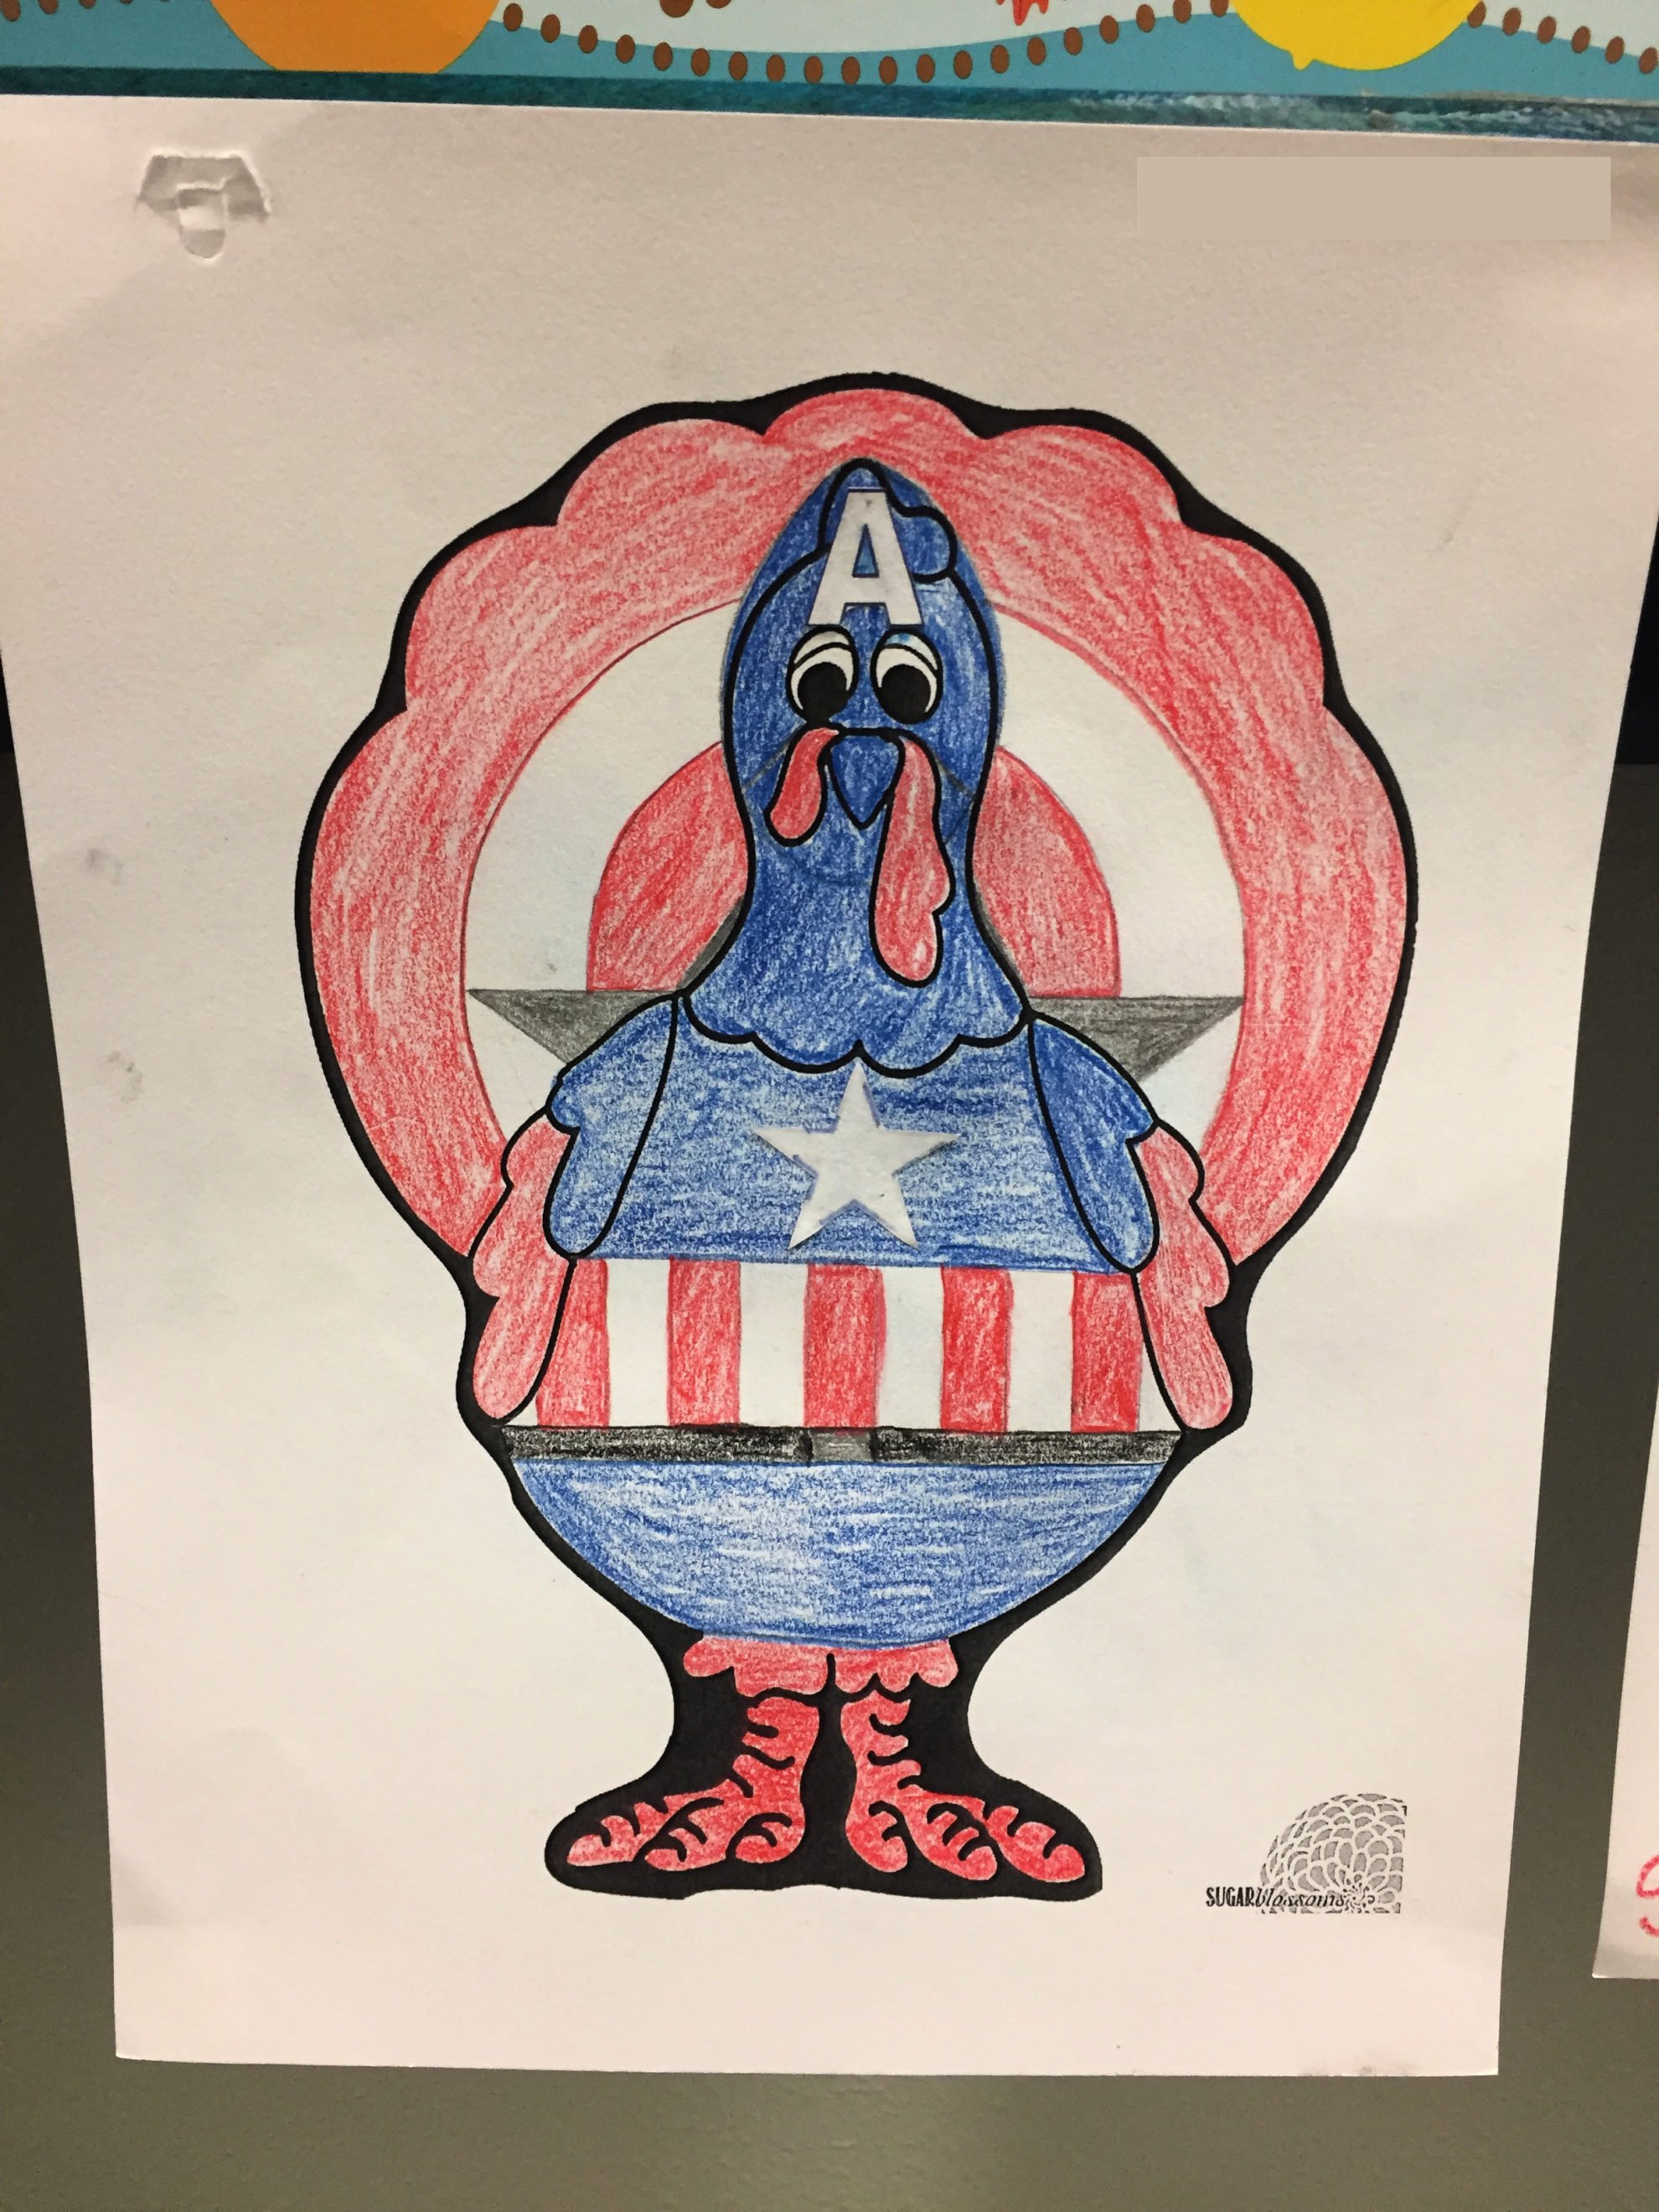 Colored Turkey In Disguise as Captain America with red white and blue crayons.